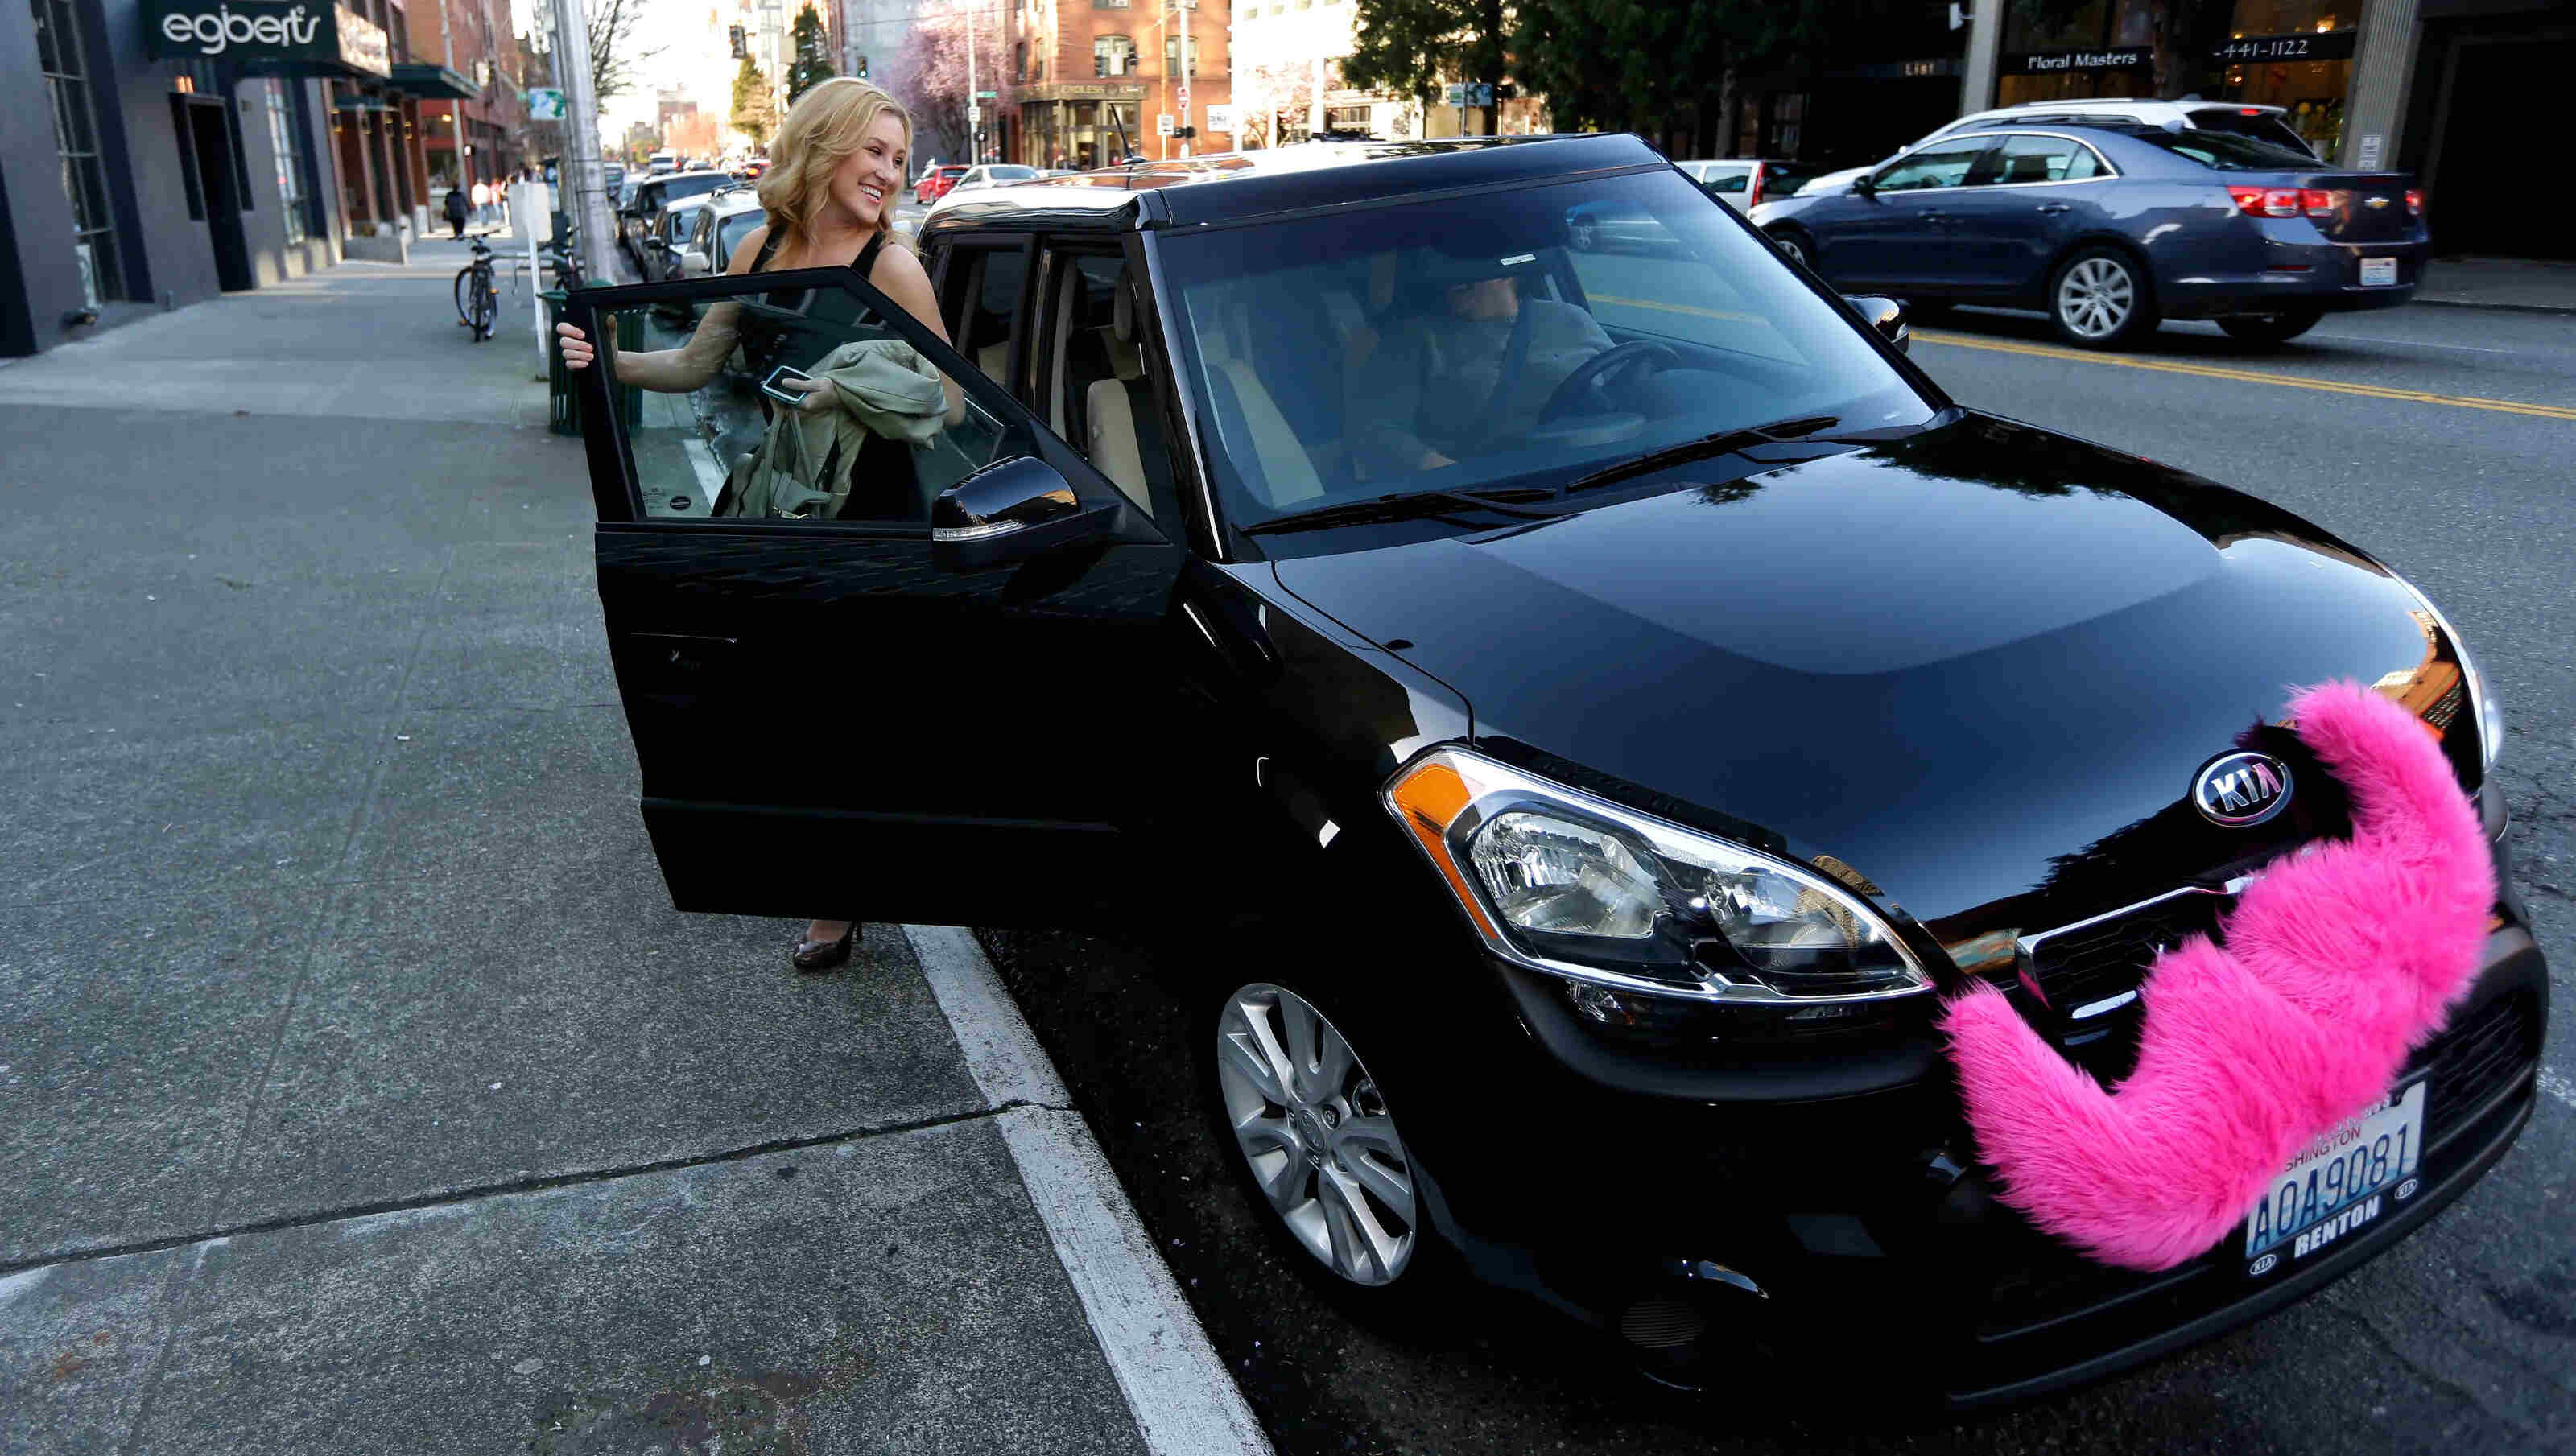 lyft-shaves-off-its-pink-mustache-replaces-it-with-glowstache